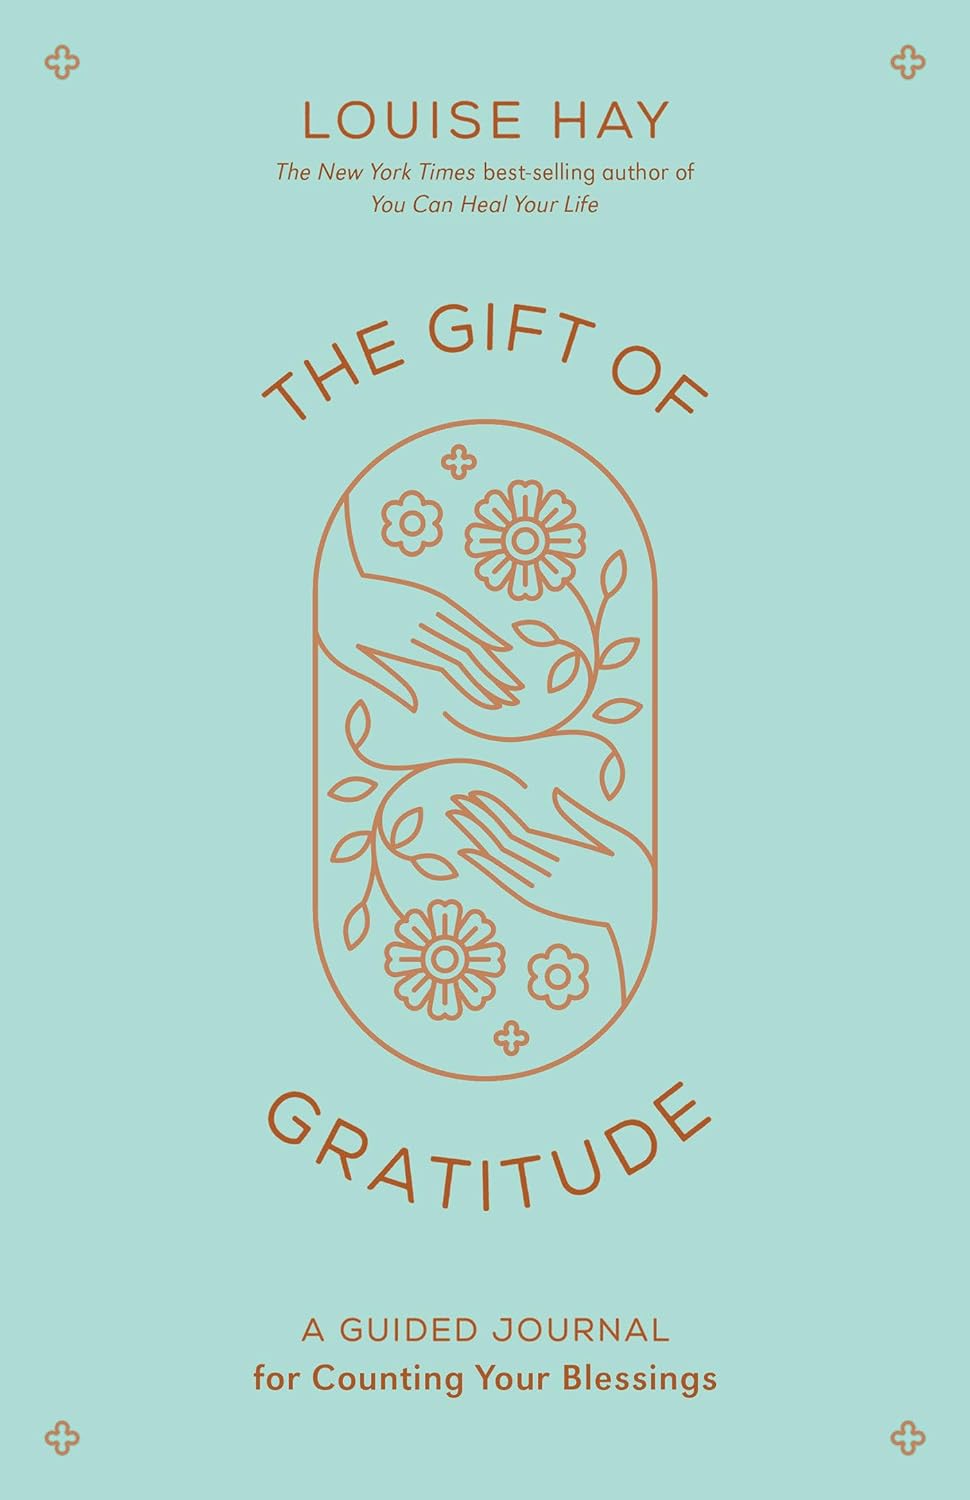 The Gift of Gratitude: A Guided Journal for Counting Your Blessings - CA Corrections Book Store